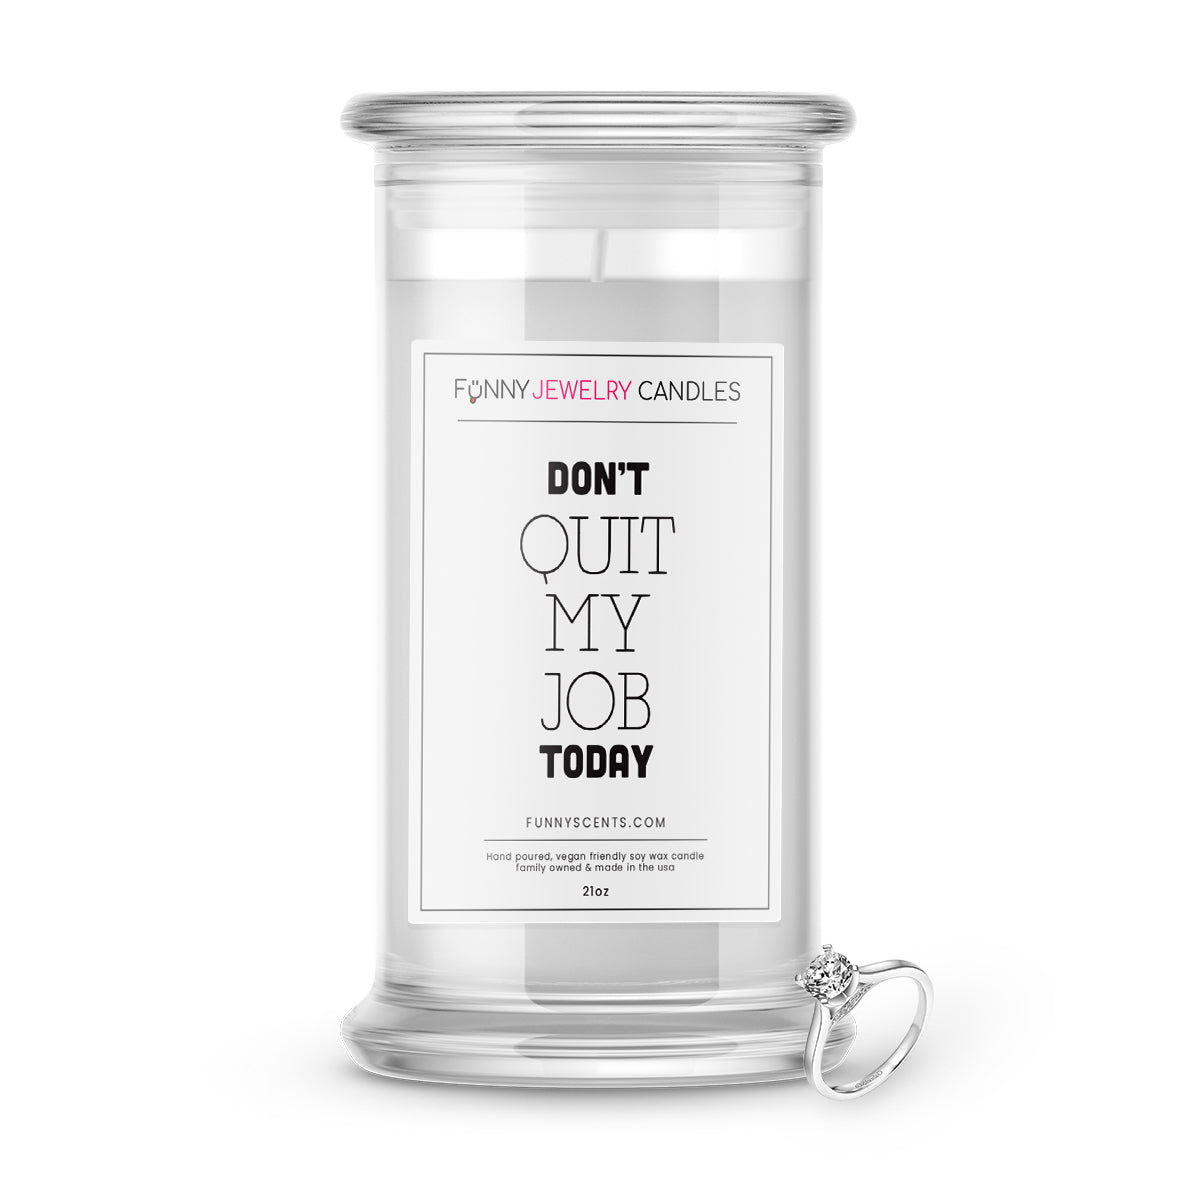 Don't Quit My Job Today Jewelry Funny Candles